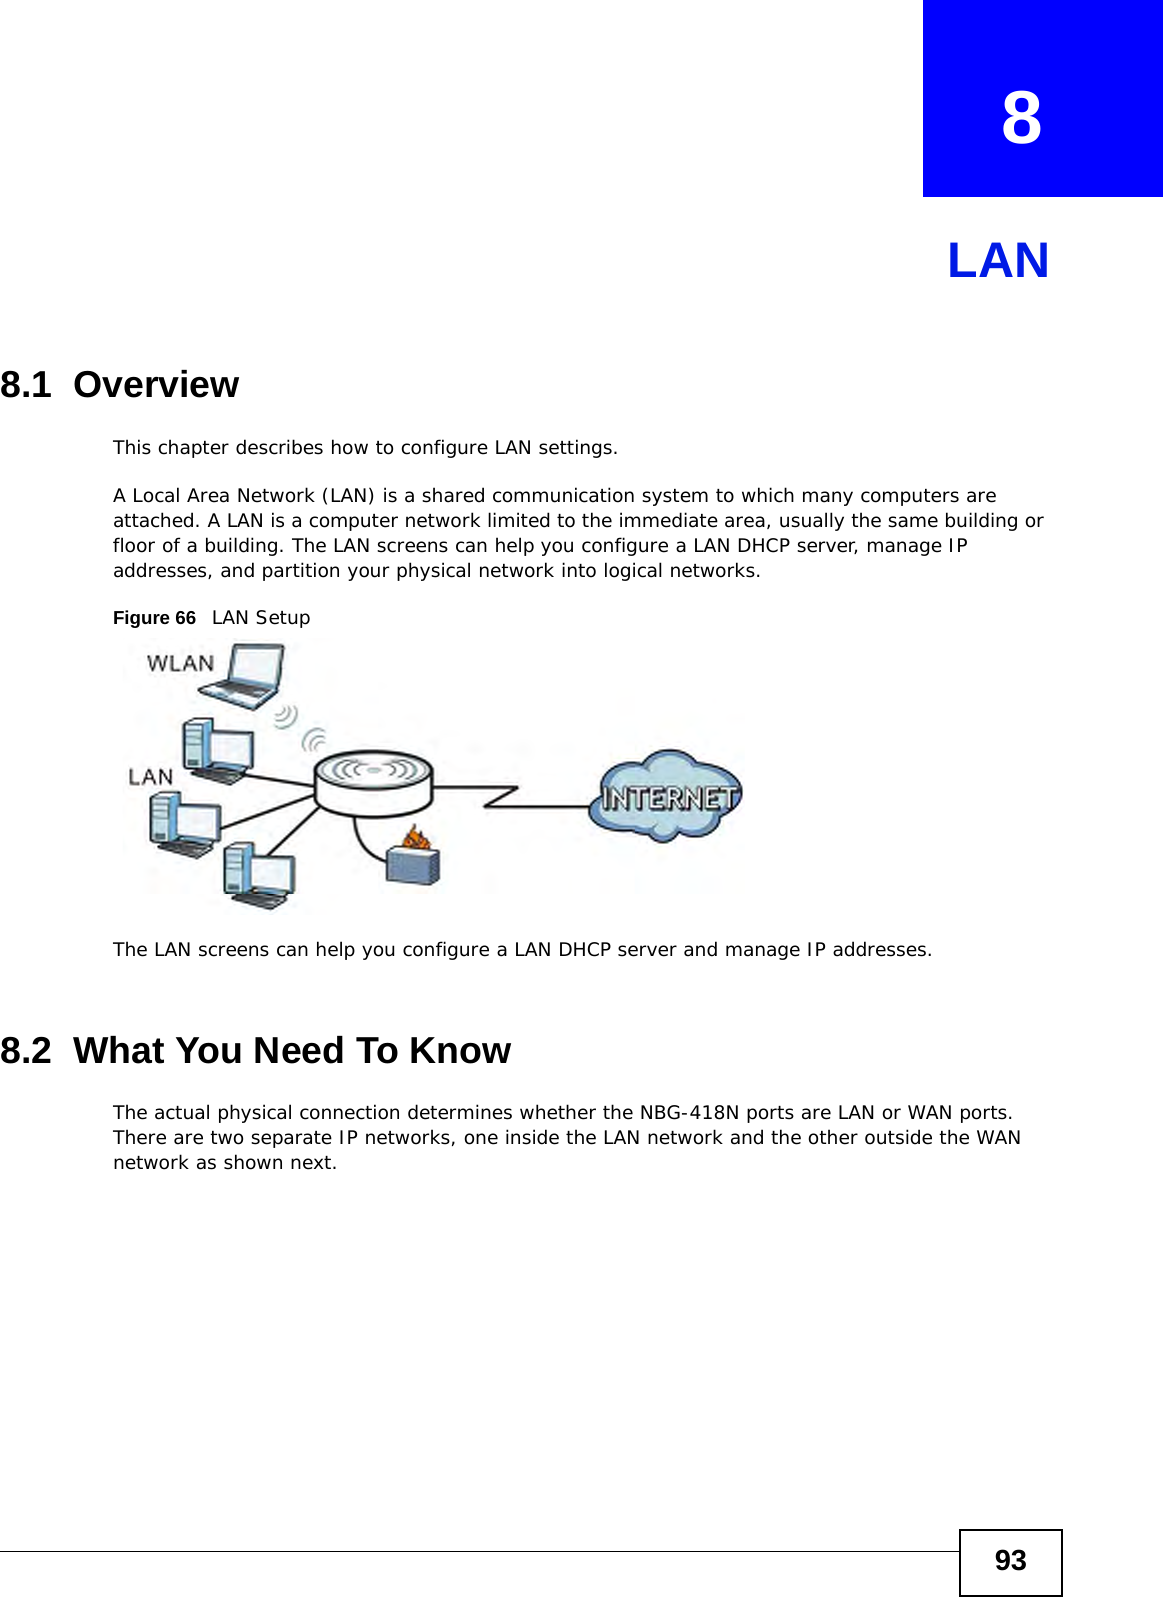 93CHAPTER   8LAN8.1  OverviewThis chapter describes how to configure LAN settings.A Local Area Network (LAN) is a shared communication system to which many computers are attached. A LAN is a computer network limited to the immediate area, usually the same building or floor of a building. The LAN screens can help you configure a LAN DHCP server, manage IP addresses, and partition your physical network into logical networks.Figure 66   LAN SetupThe LAN screens can help you configure a LAN DHCP server and manage IP addresses.8.2  What You Need To KnowThe actual physical connection determines whether the NBG-418N ports are LAN or WAN ports. There are two separate IP networks, one inside the LAN network and the other outside the WAN network as shown next.